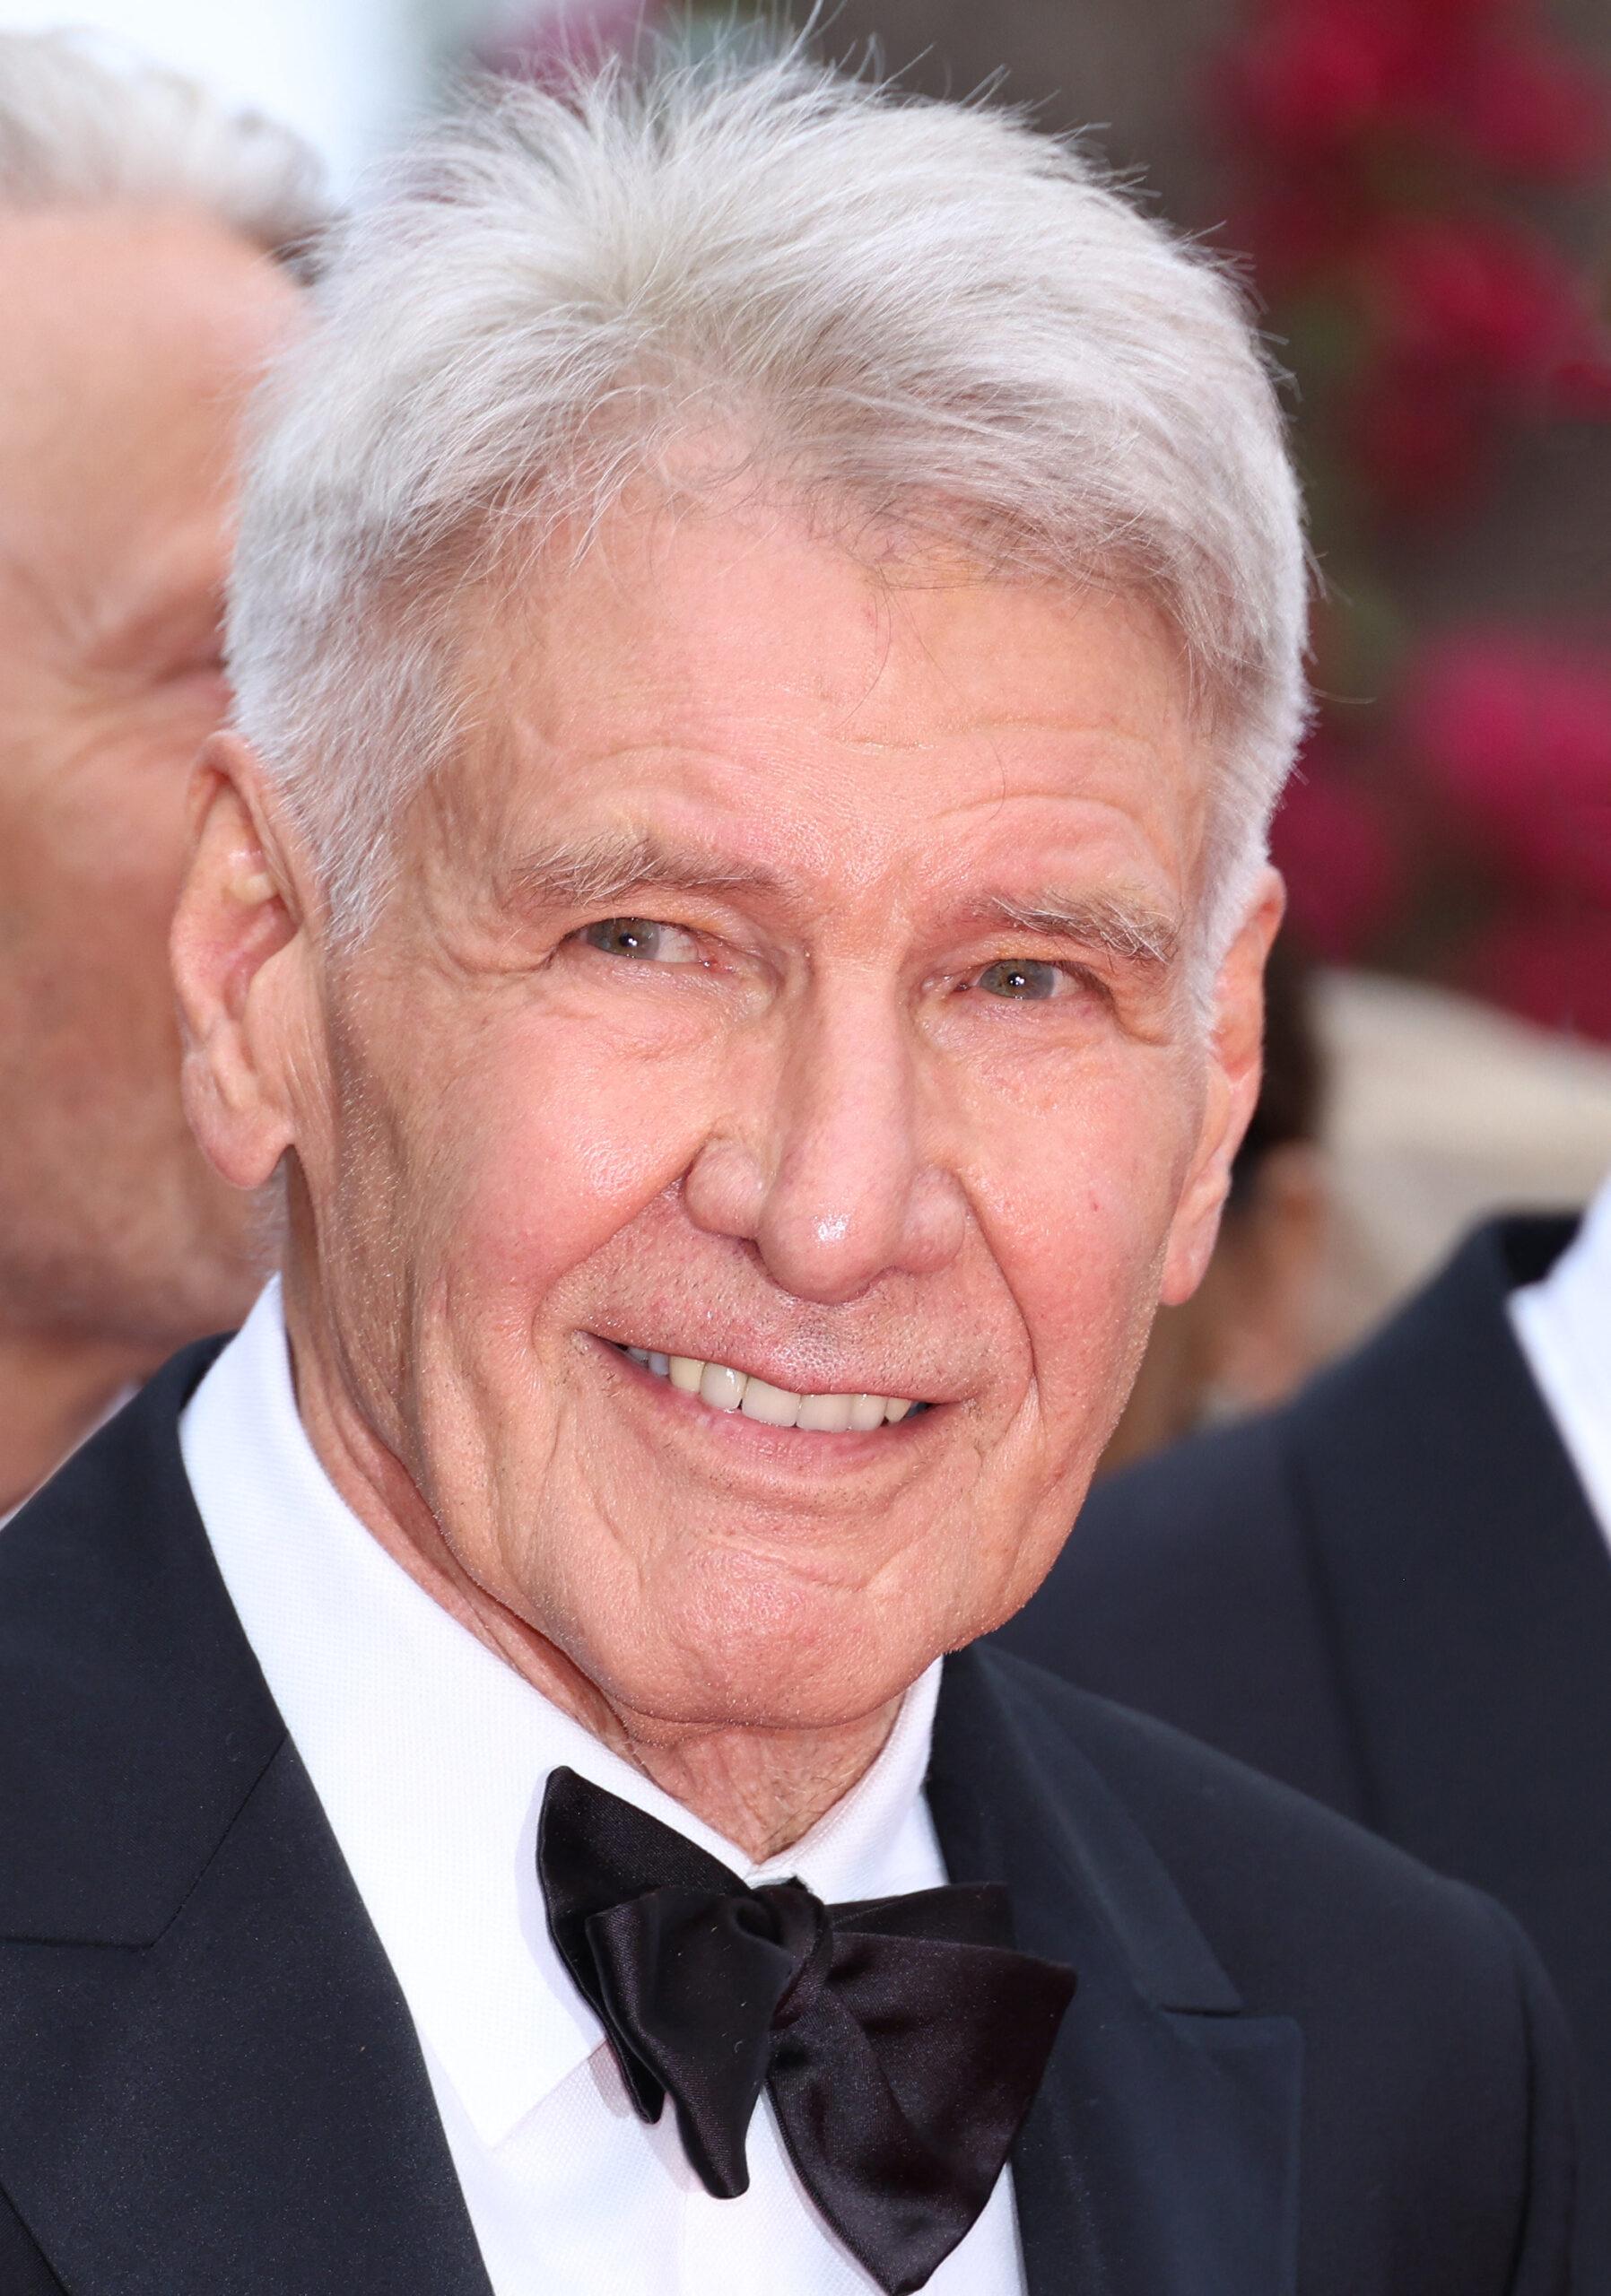 Harrison Ford at the Cannes Film Festival premiere of 'Indiana Jones 5'